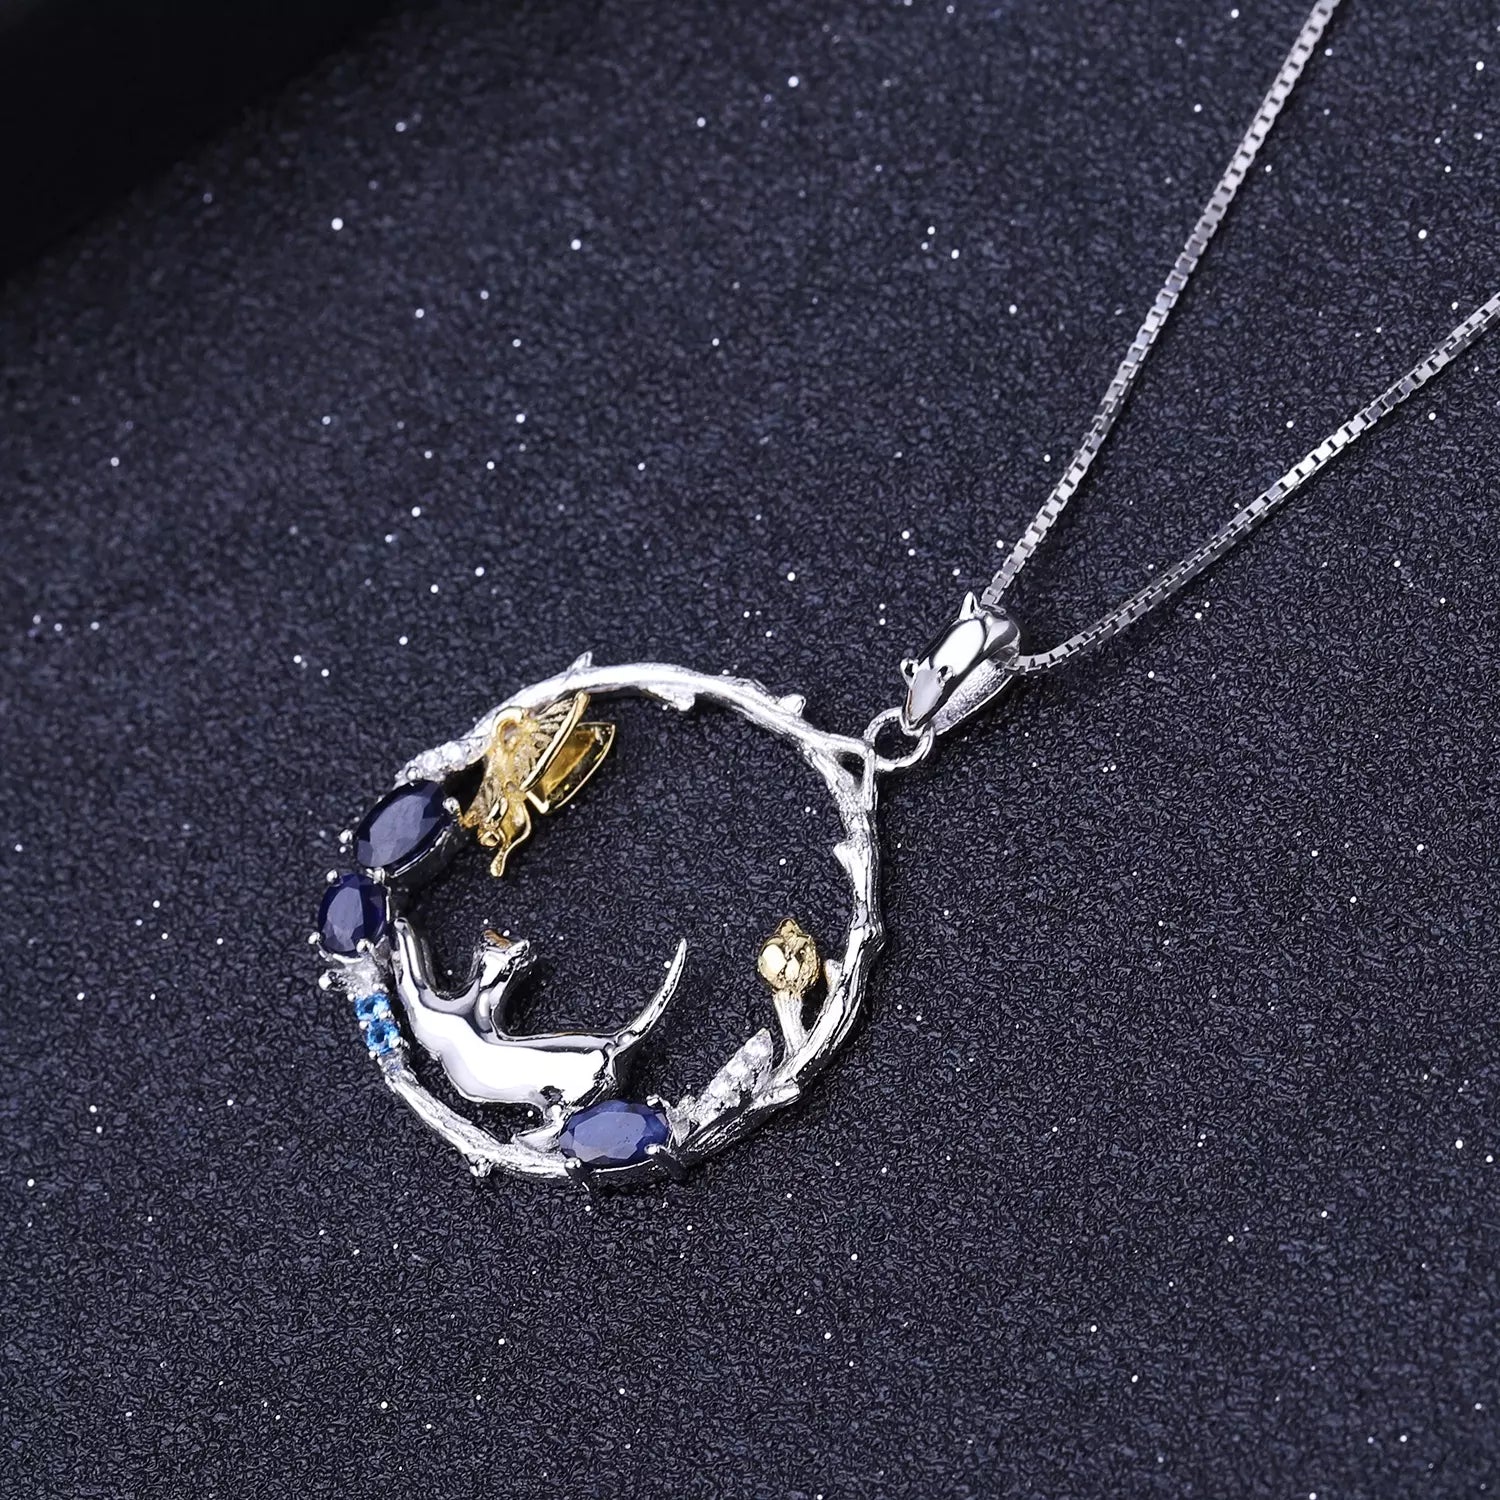 Natural Gemstone Fine Jewelry Cat Necklace in Solid 925 Sterling Silver and 18K Gold Plating